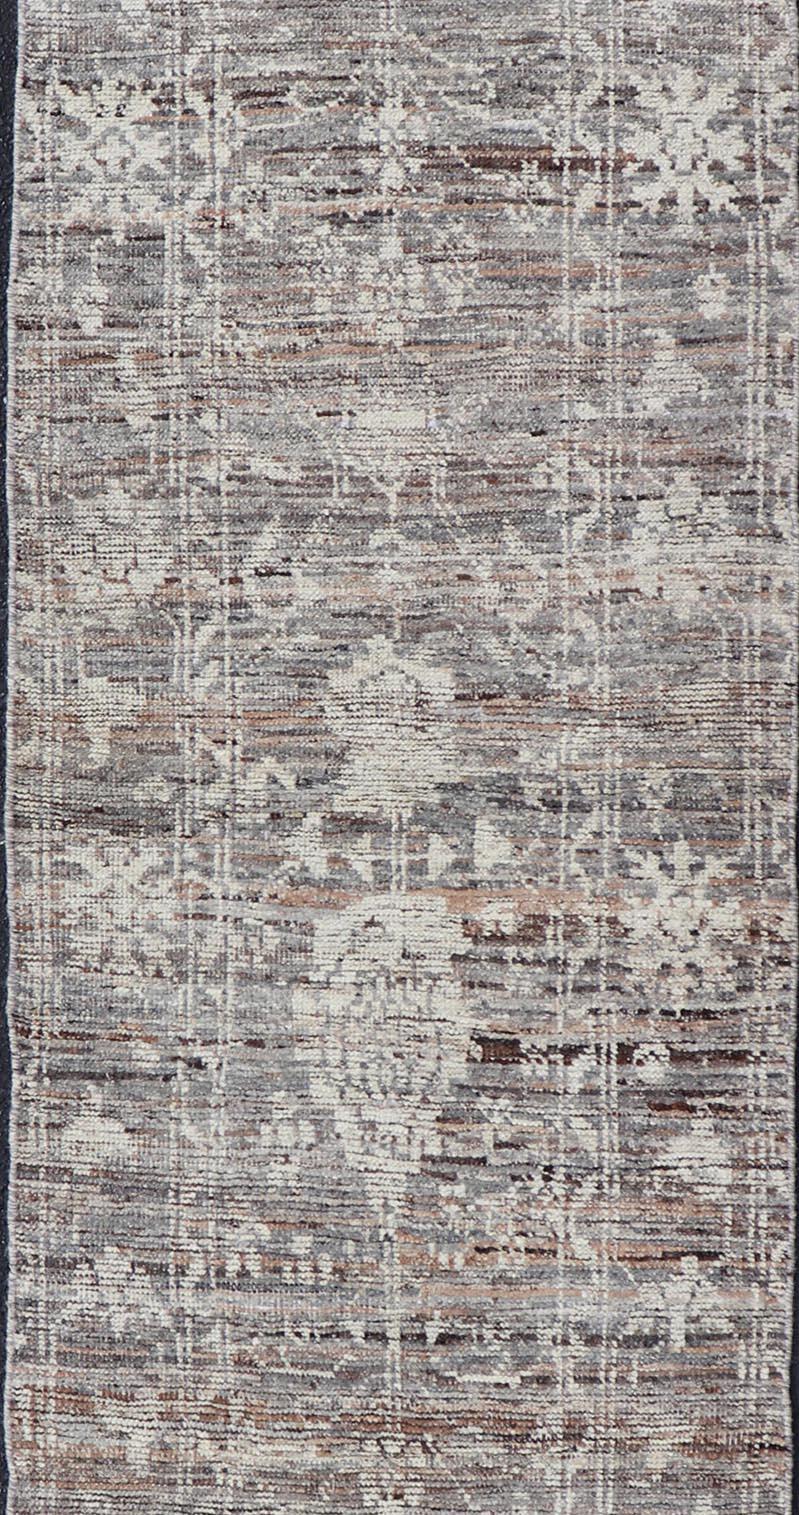 Modern Oushak Runner in Wool with Floral Design in Shades of Gray, Brown, Cream. Keivan Woven Arts; rug AFG-64917, country of origin / type: Afghanistan / Oushak, circa Early-21th Century.
Measures: 3'0 x 12'1 
This modern casual tribal Oushak